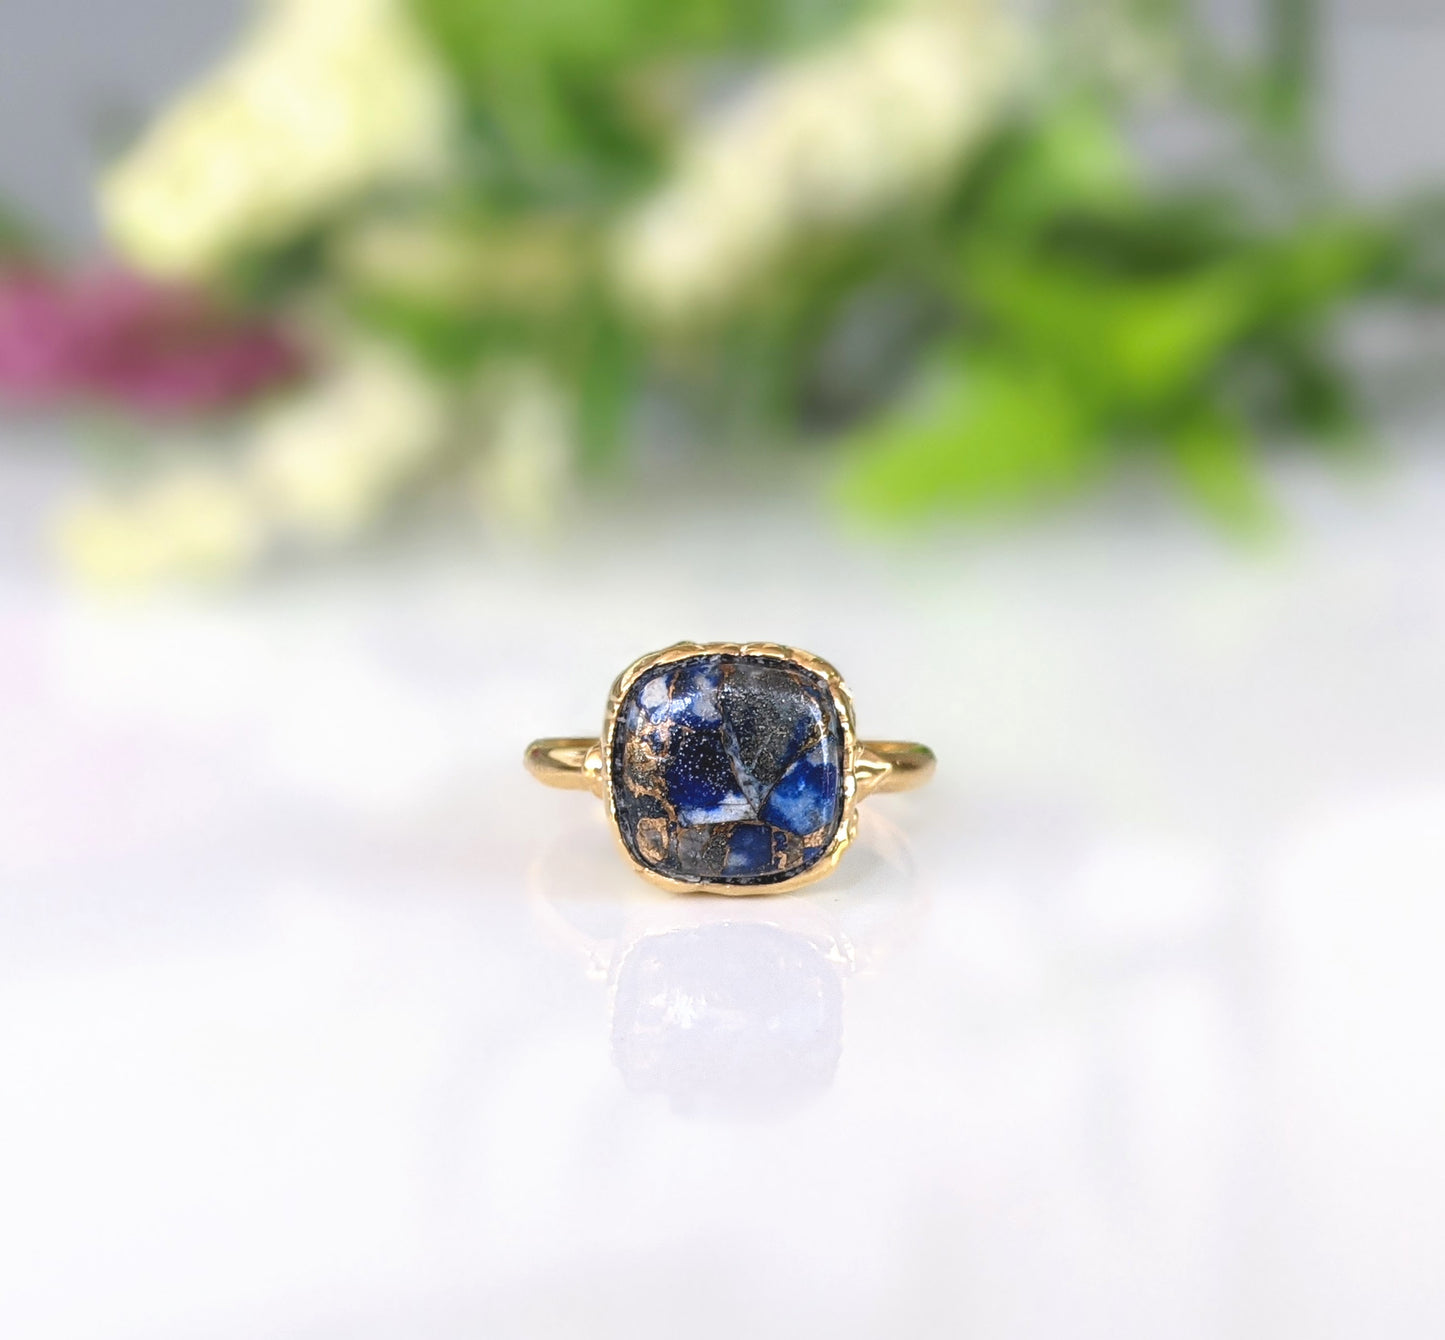 Natural large Lapis Lazuli ring in unique 18k Gold setting